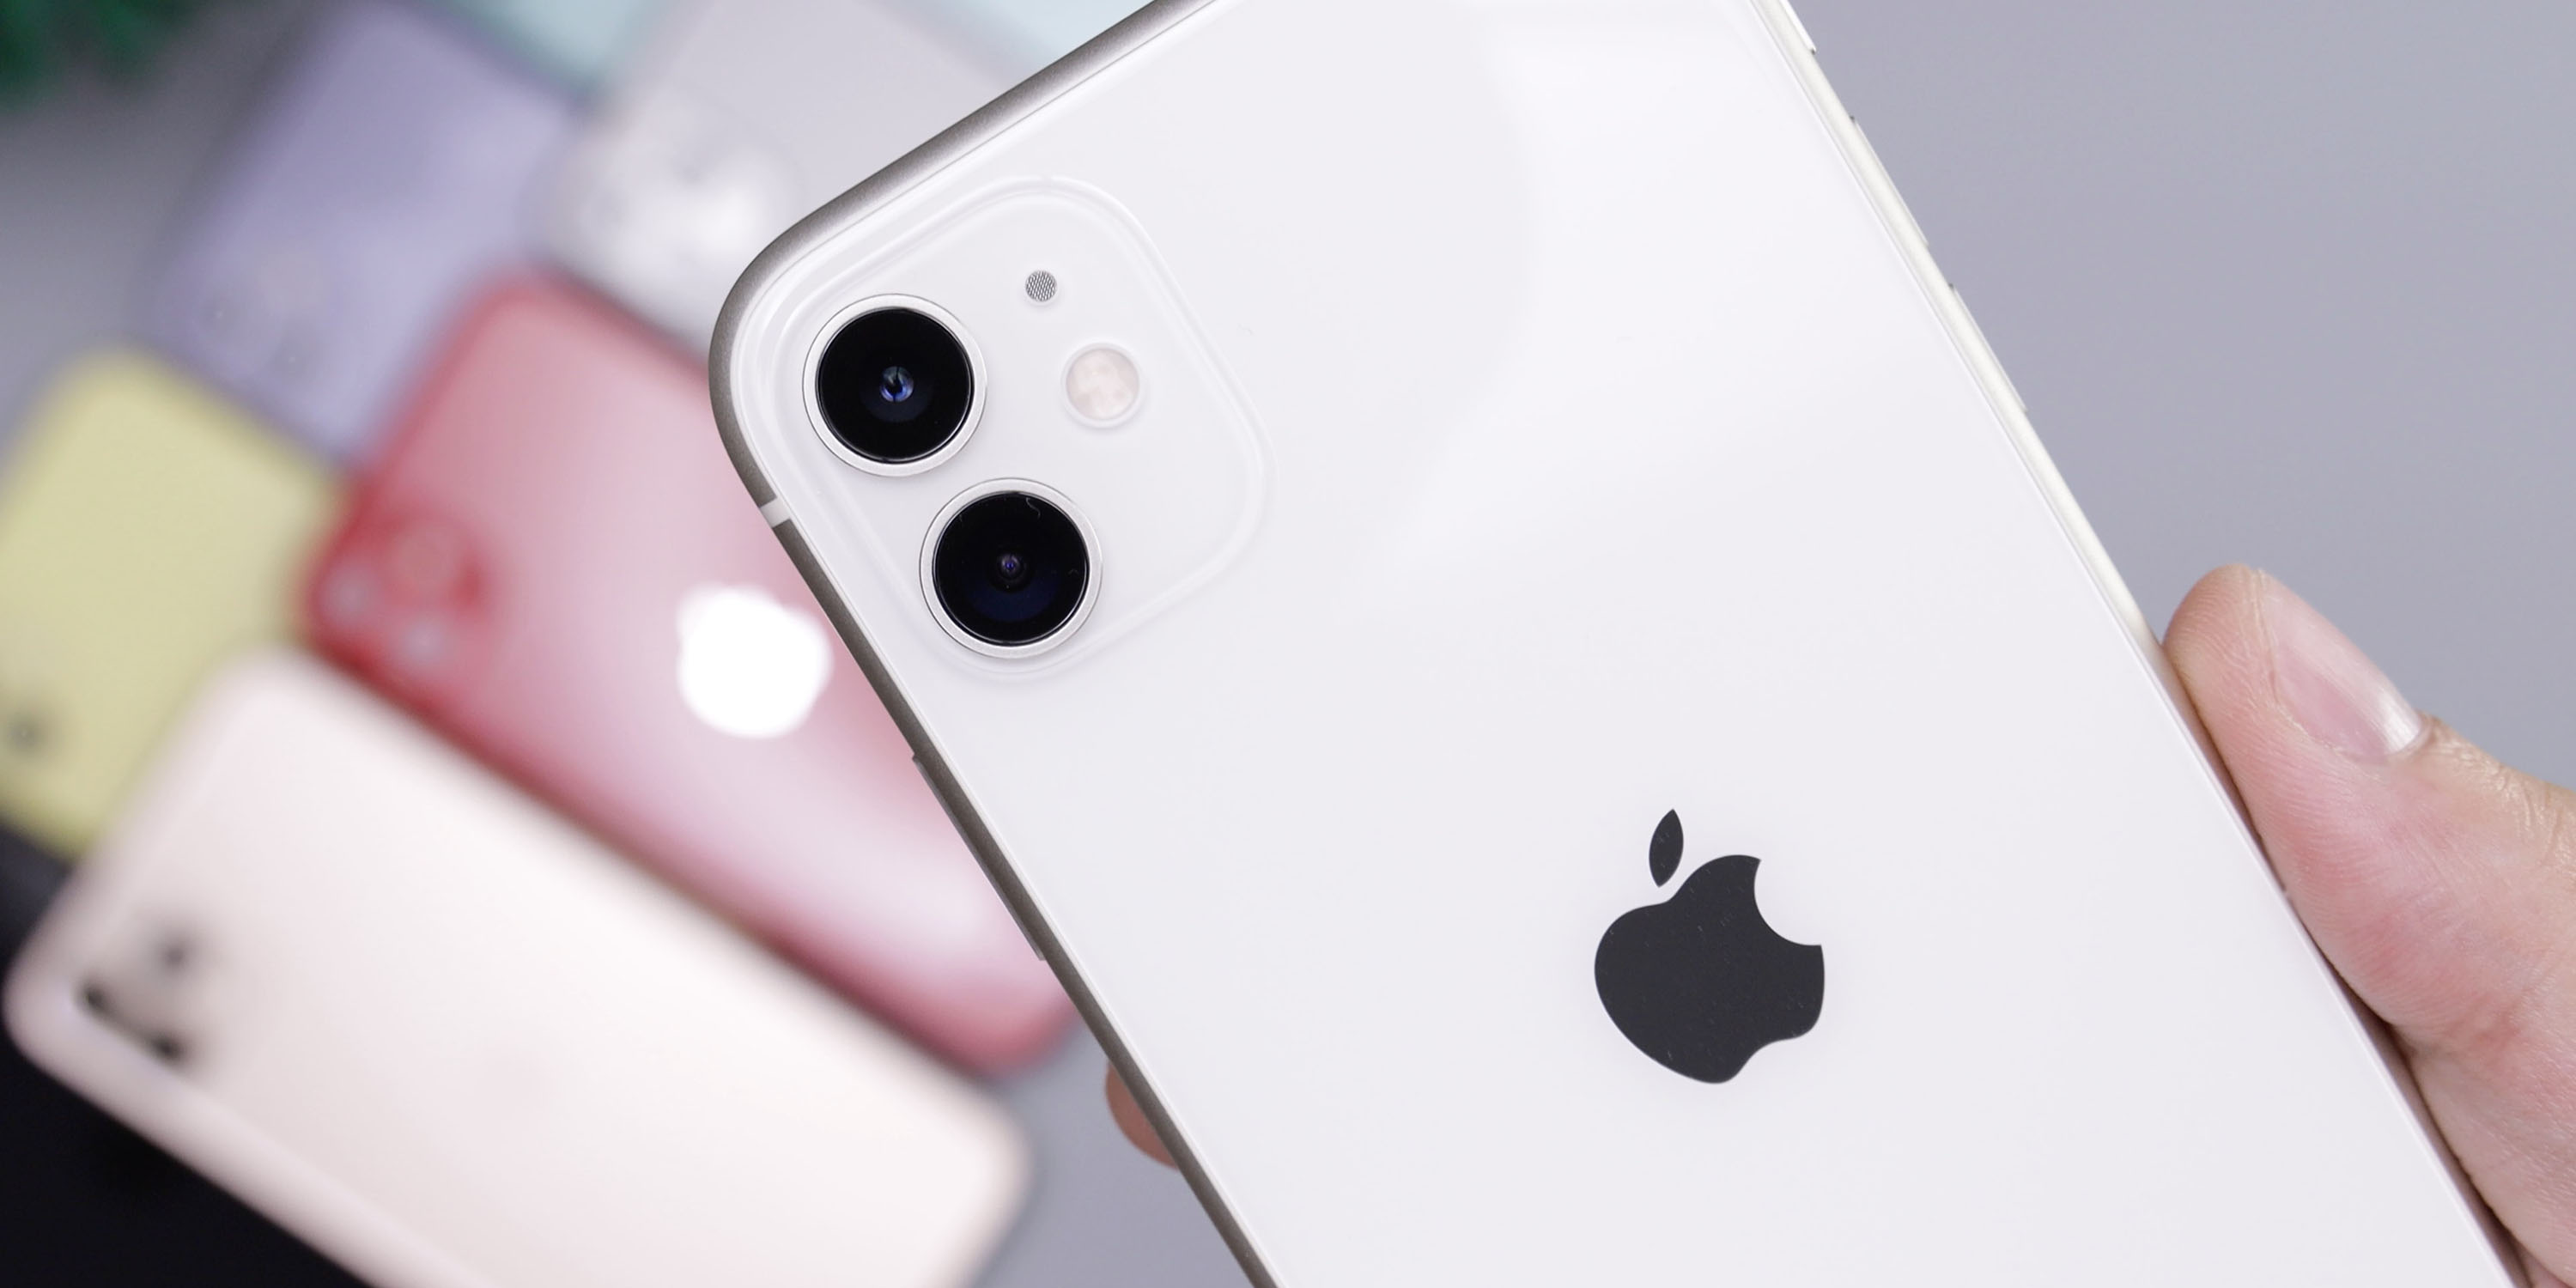 iPhone 11: Features, Release Date, Price, Cameras, etc. - 9to5Mac